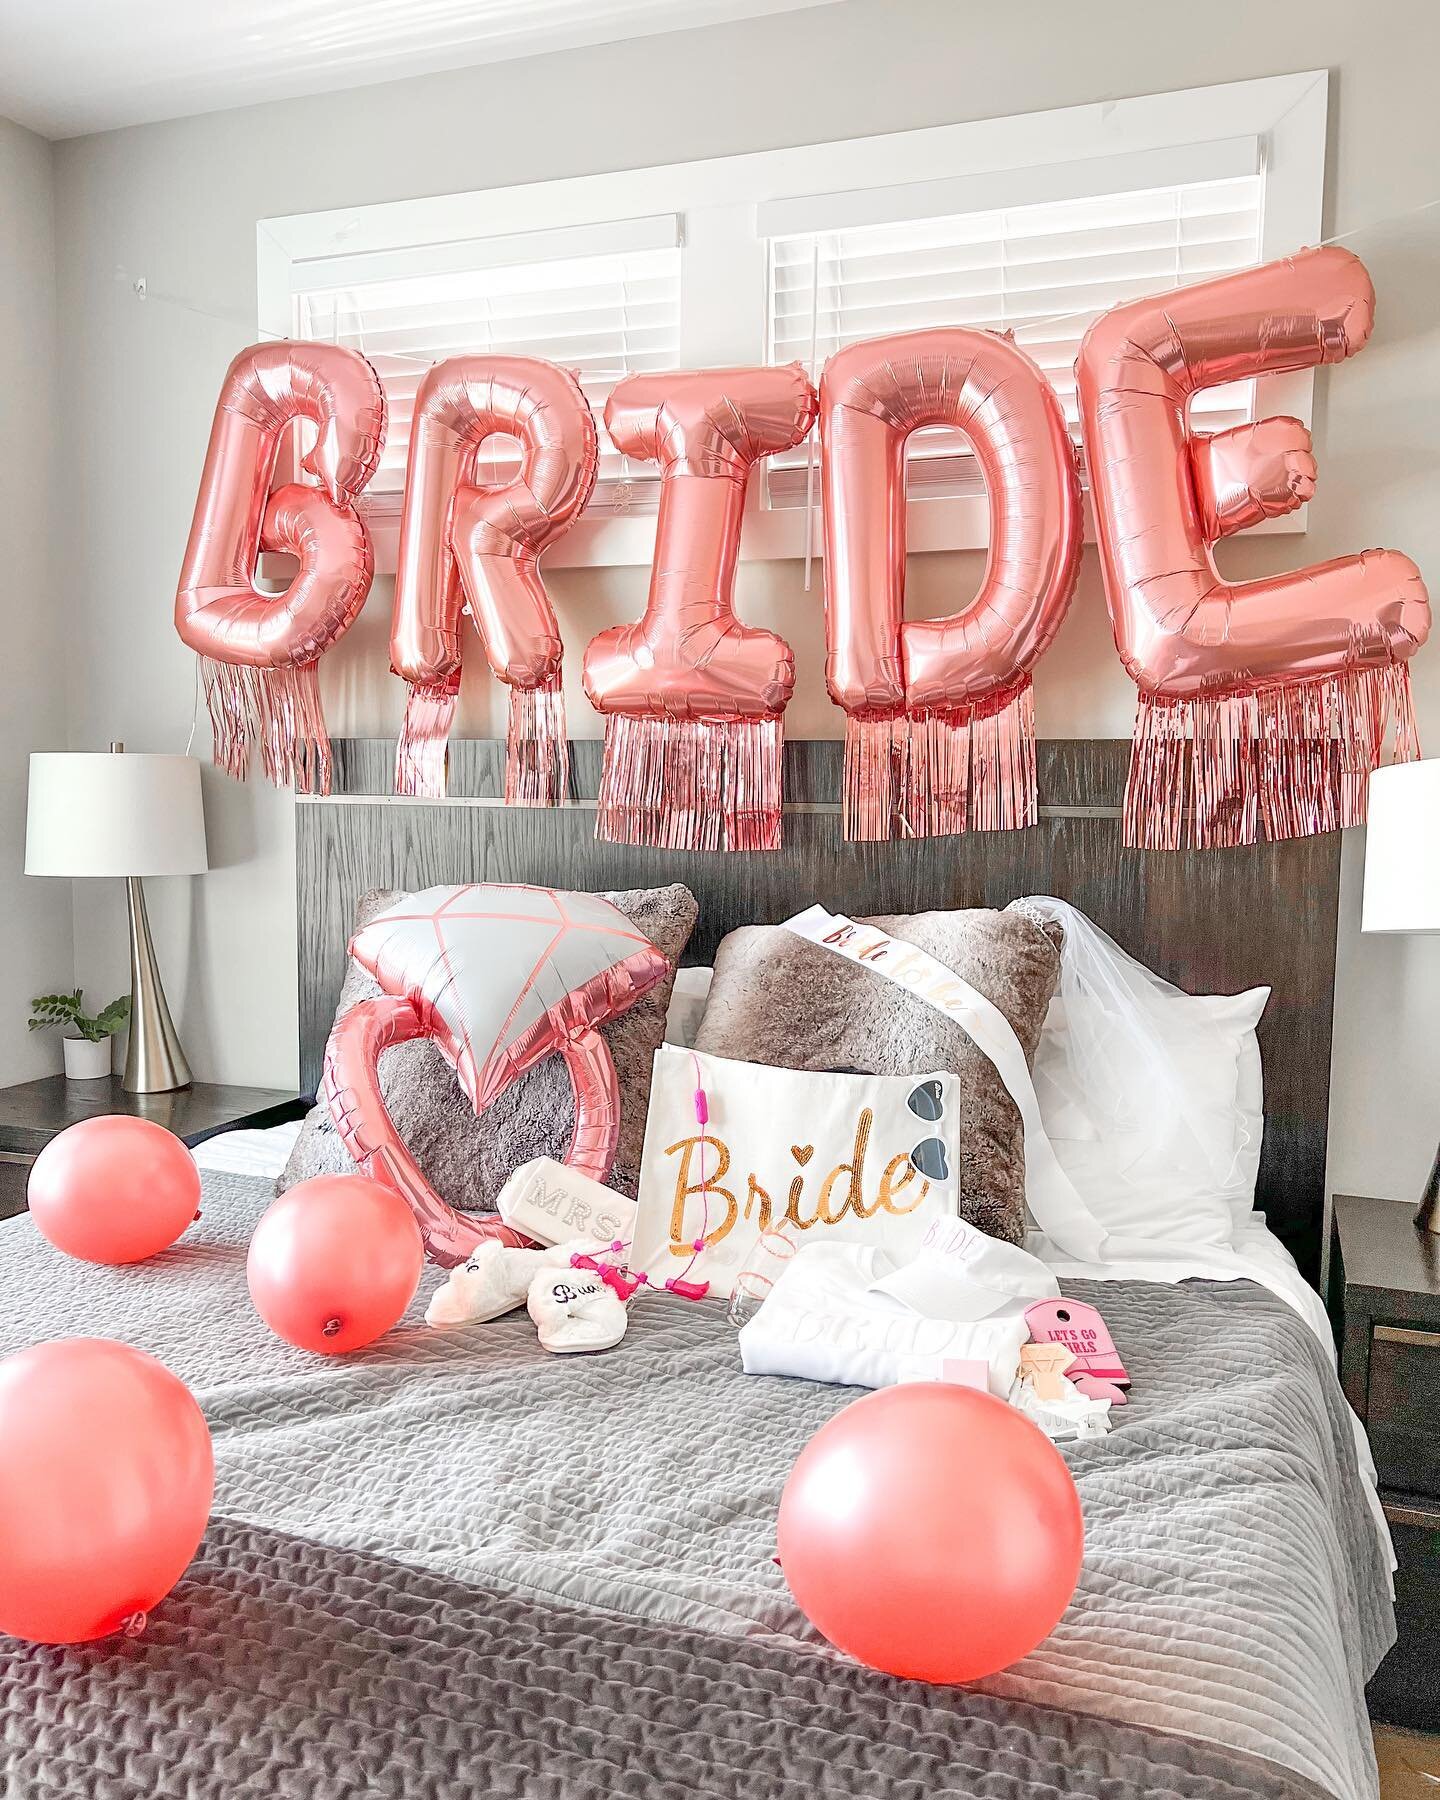 We added this mini tassel fringe to our Bride balloons for the first time! 😍

Are you a fan of how it turned out? 

#bridalsuite #brideroom #bachelorettedecor #nashvillebachelorette #nashbash #2023bride #nashvillebride